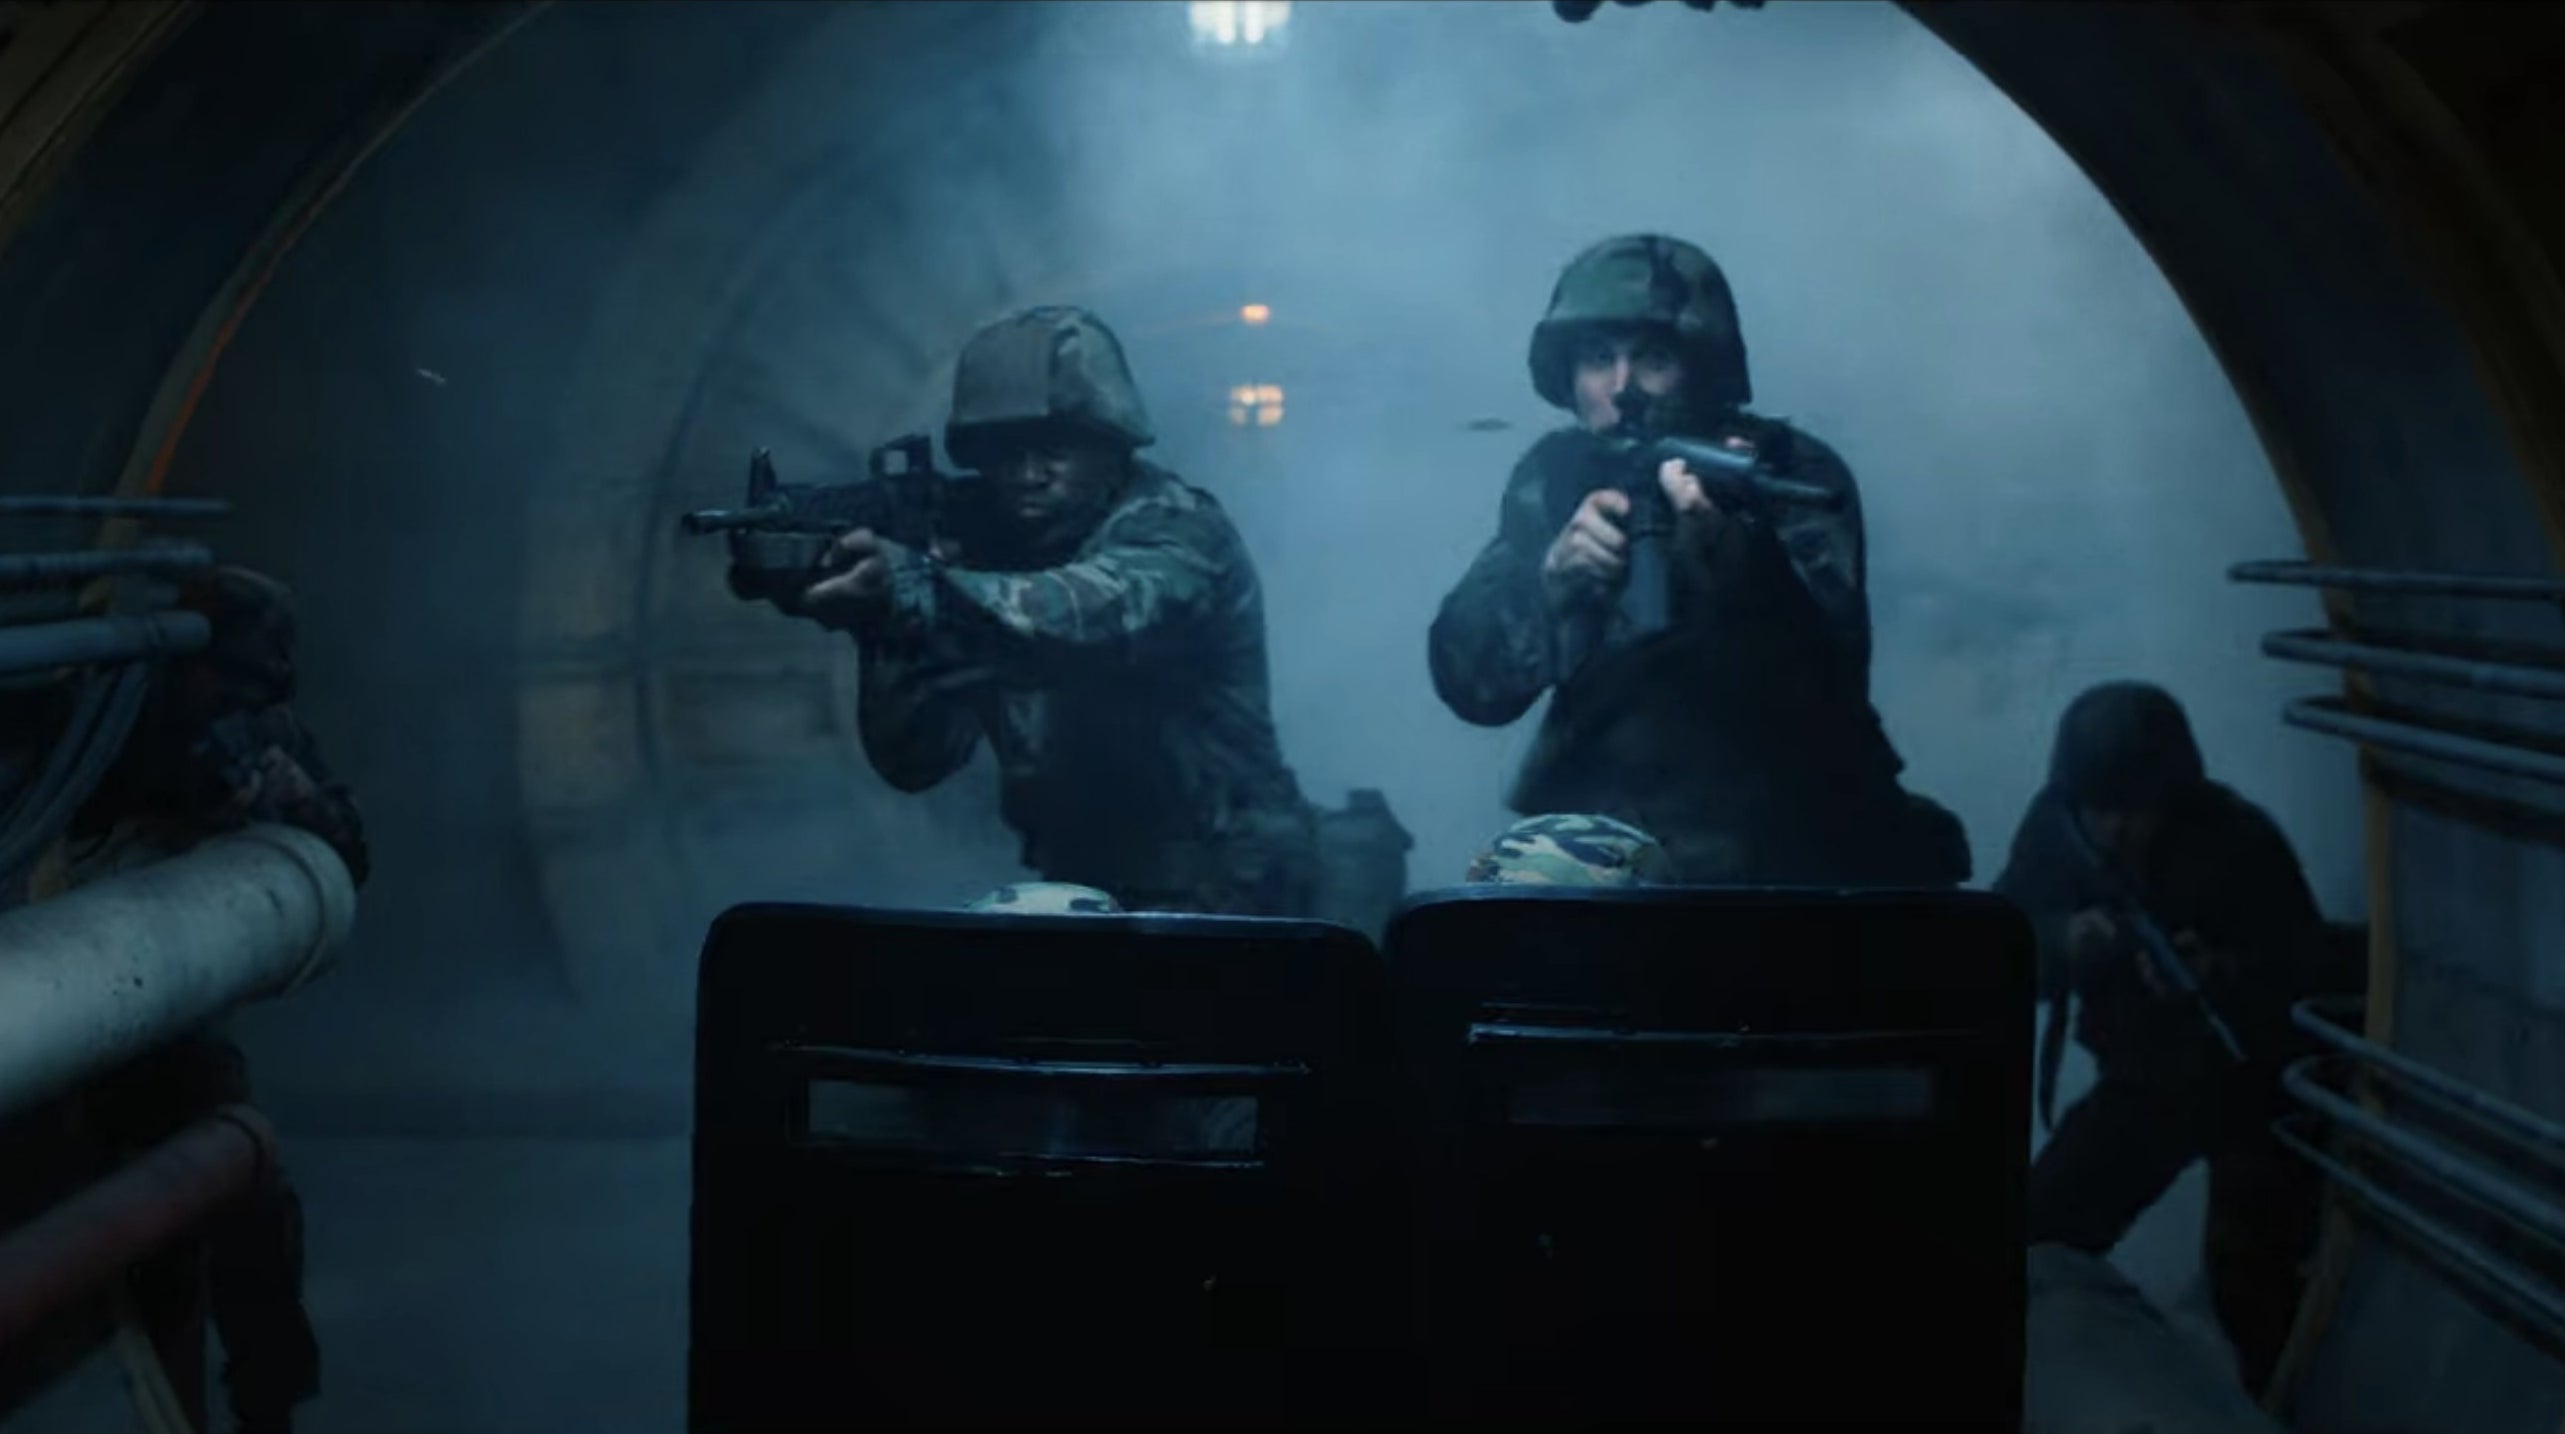 U.S. military soldiers firing guns inside the Nina Project in &quot;Stranger Things&quot;